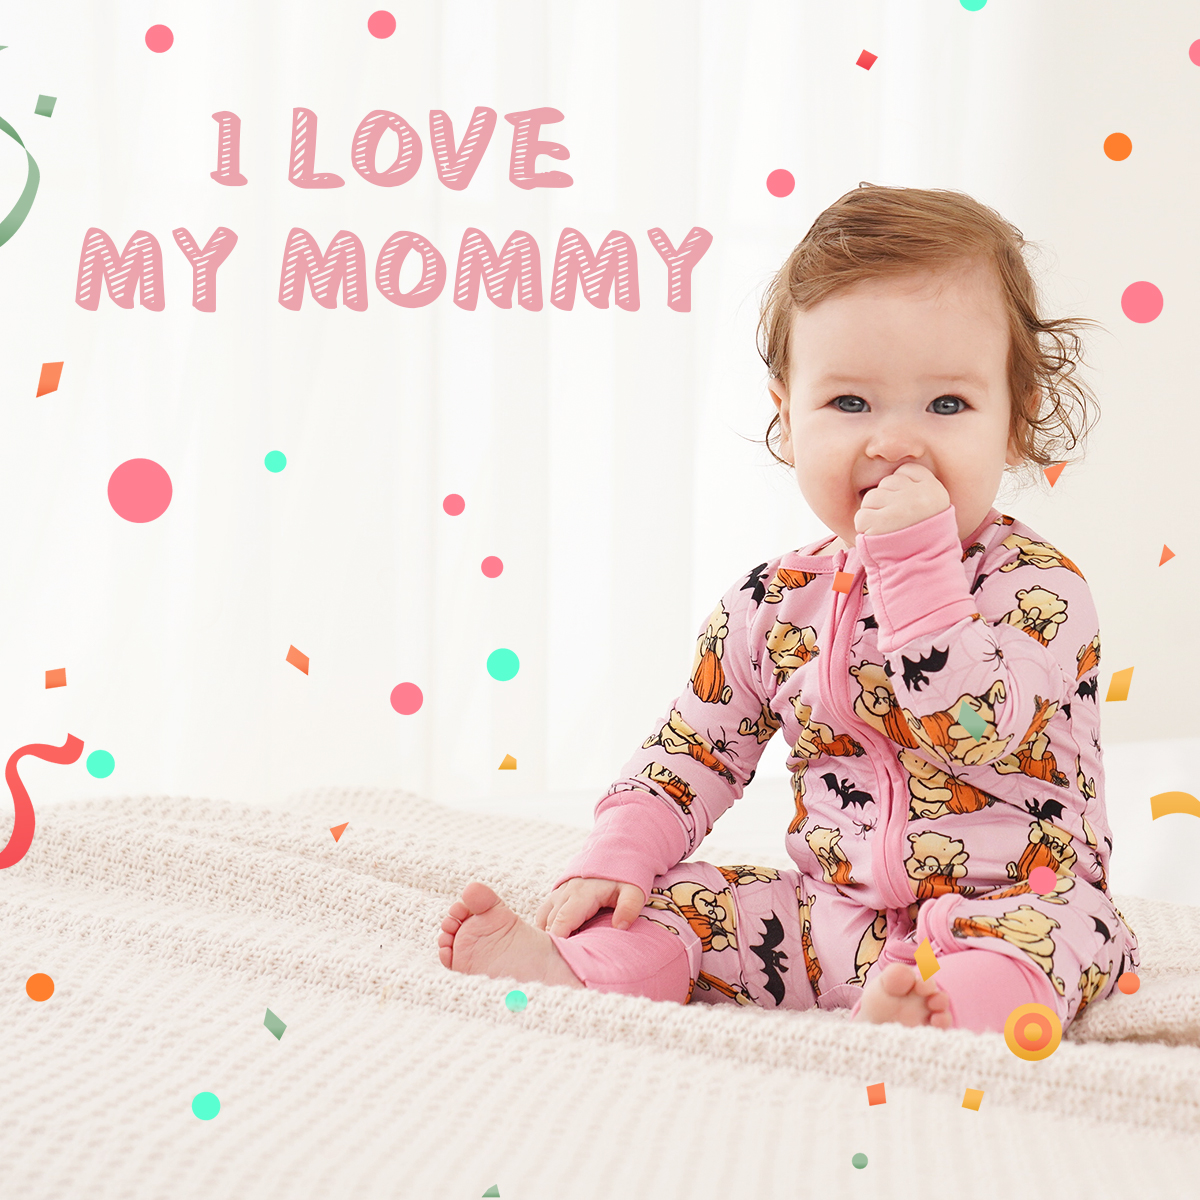 Get ready to capture those priceless smiles and giggles this Mother's Day. 📸
#MomAndMe #MothersDayMagic #BabyLove
#fancyprince #baby #bamboo #bamboofabric #bamboobaby #babypajamas #pajamas #BambooComfort #sleepsuit #monthersday